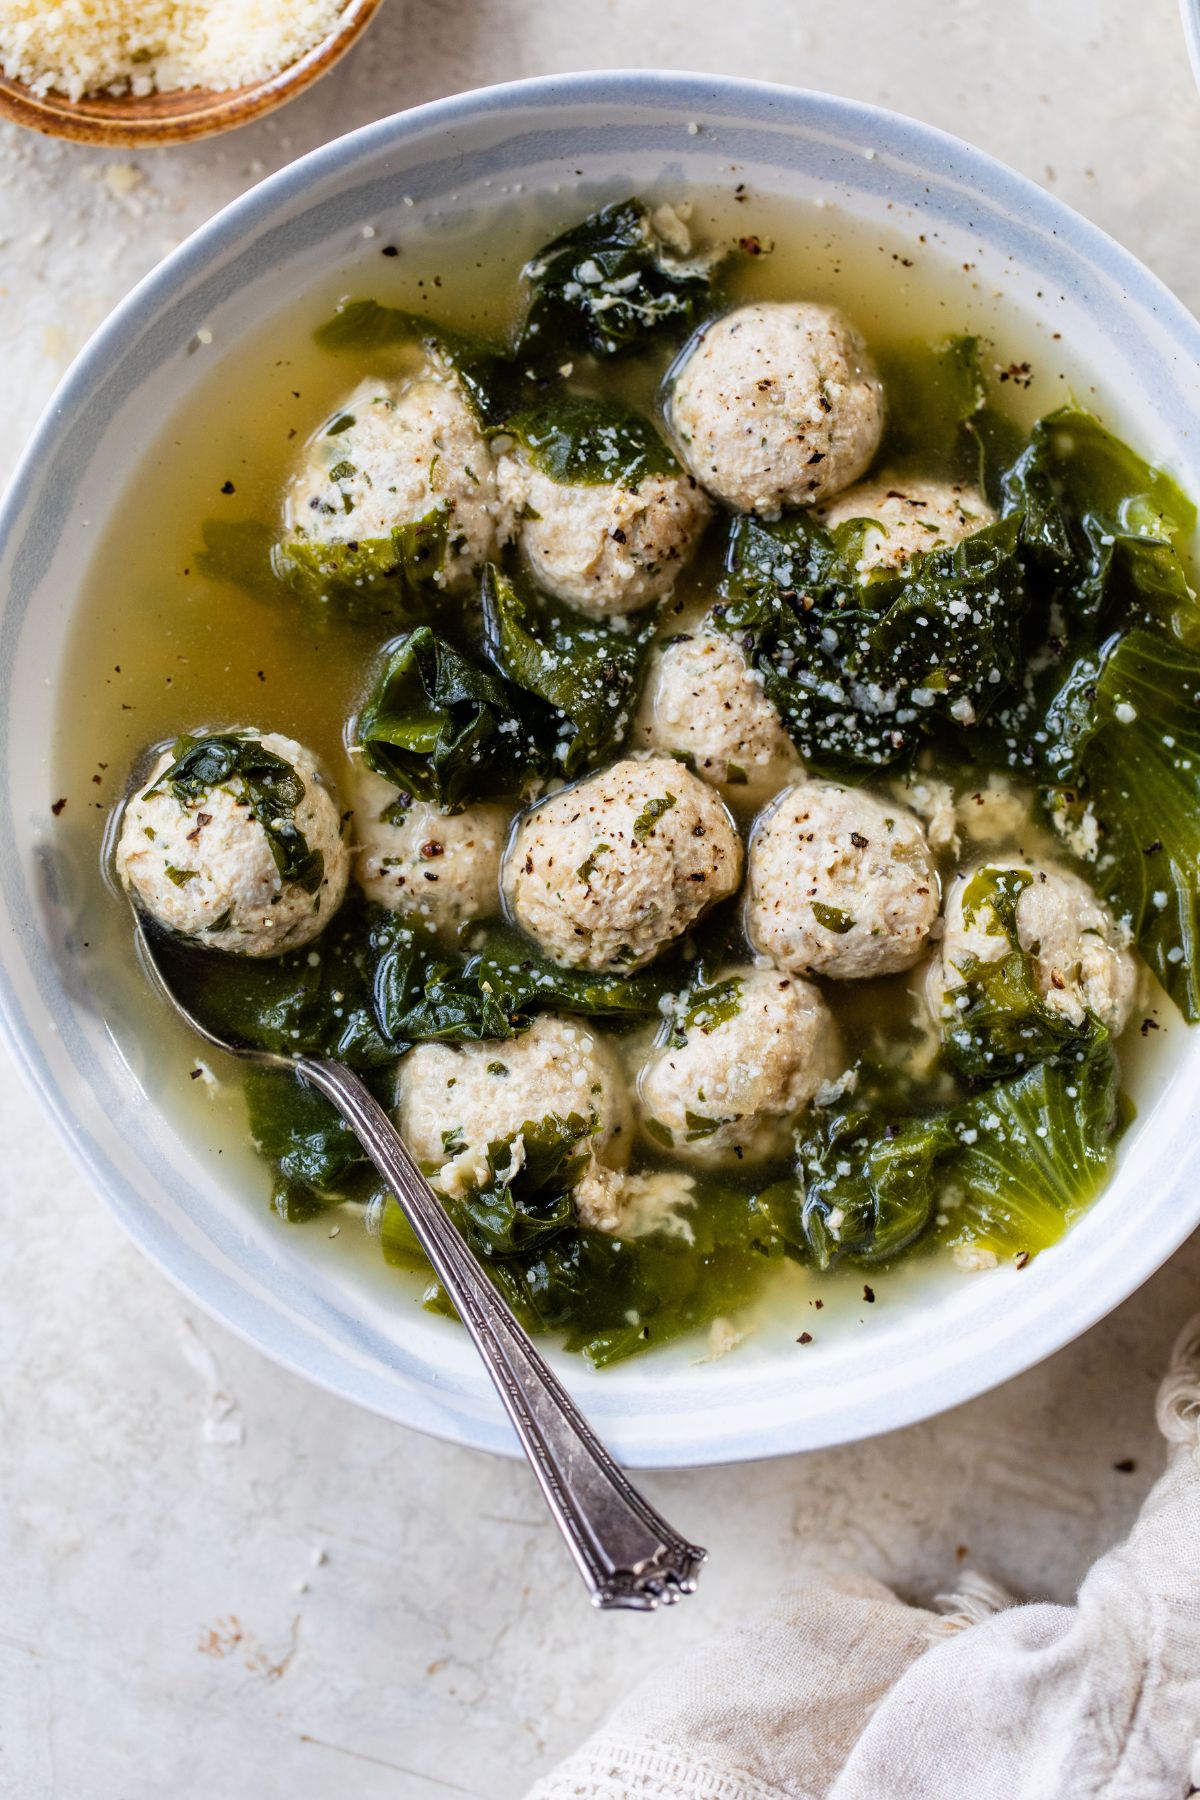 Italian wedding soup in a white bowl with a spoon.